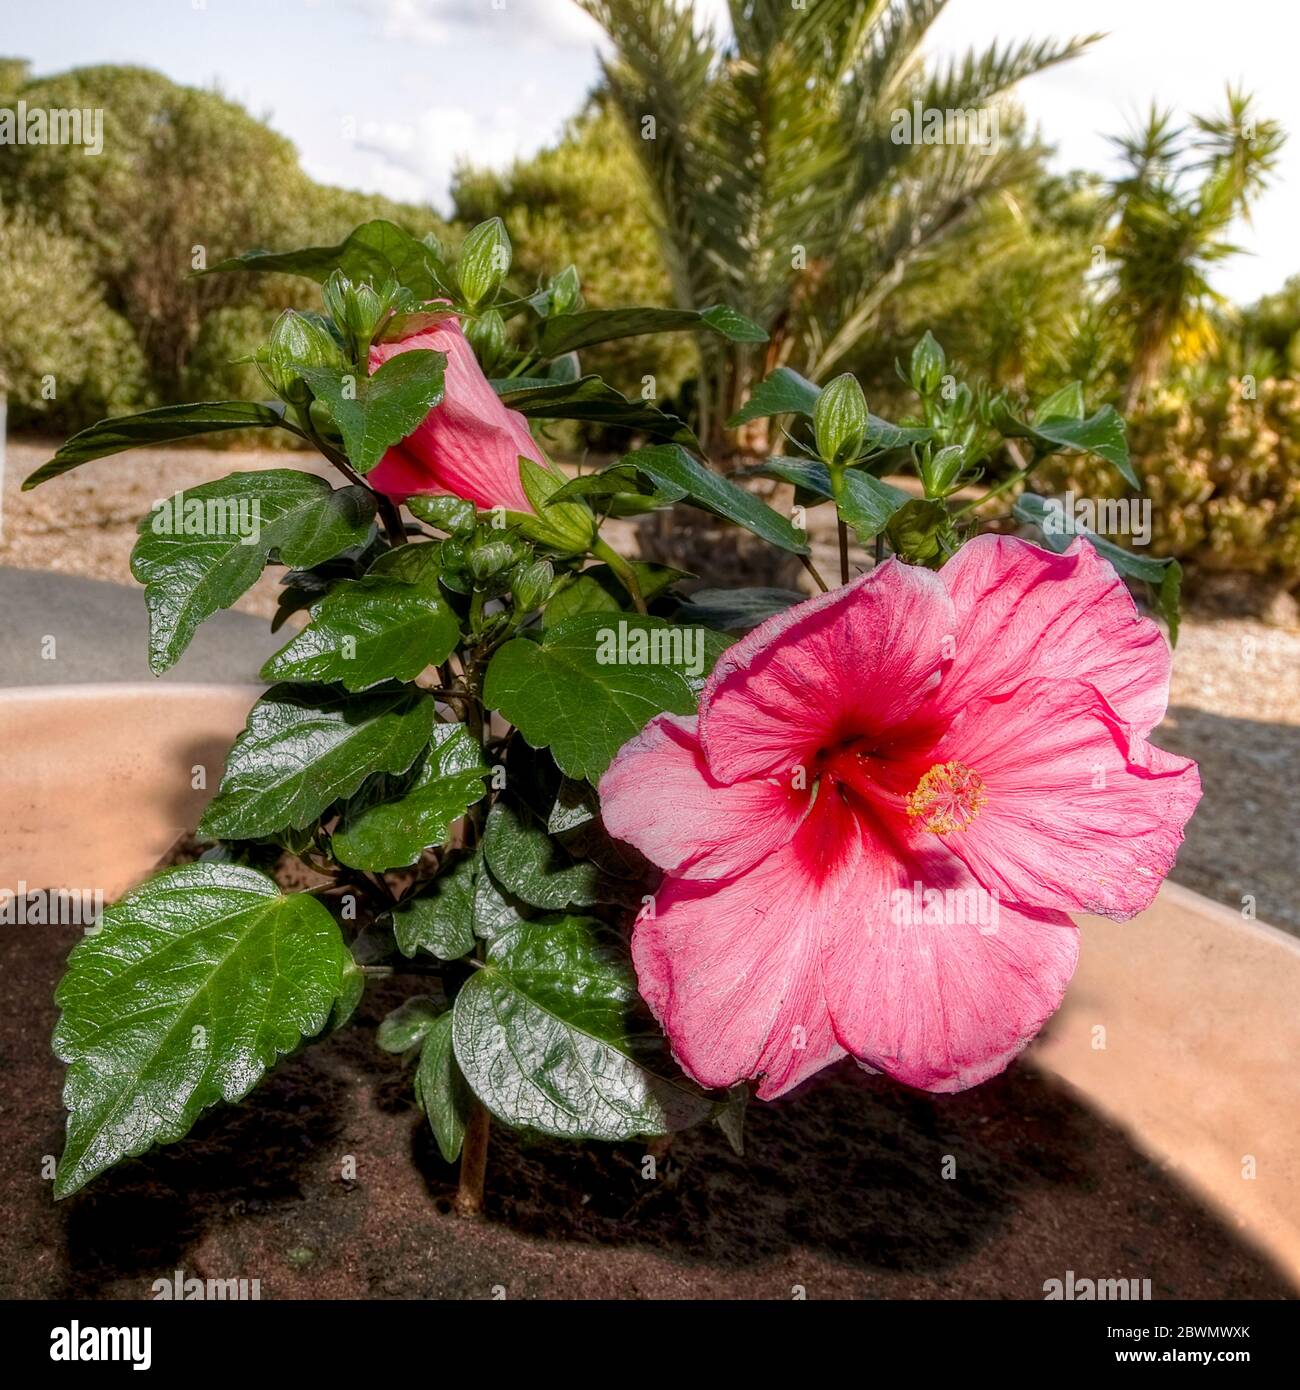 Hibiscus Flower. Isolated.Close-up image of a pink hibiscus flower. Stock Image. Stock Photo